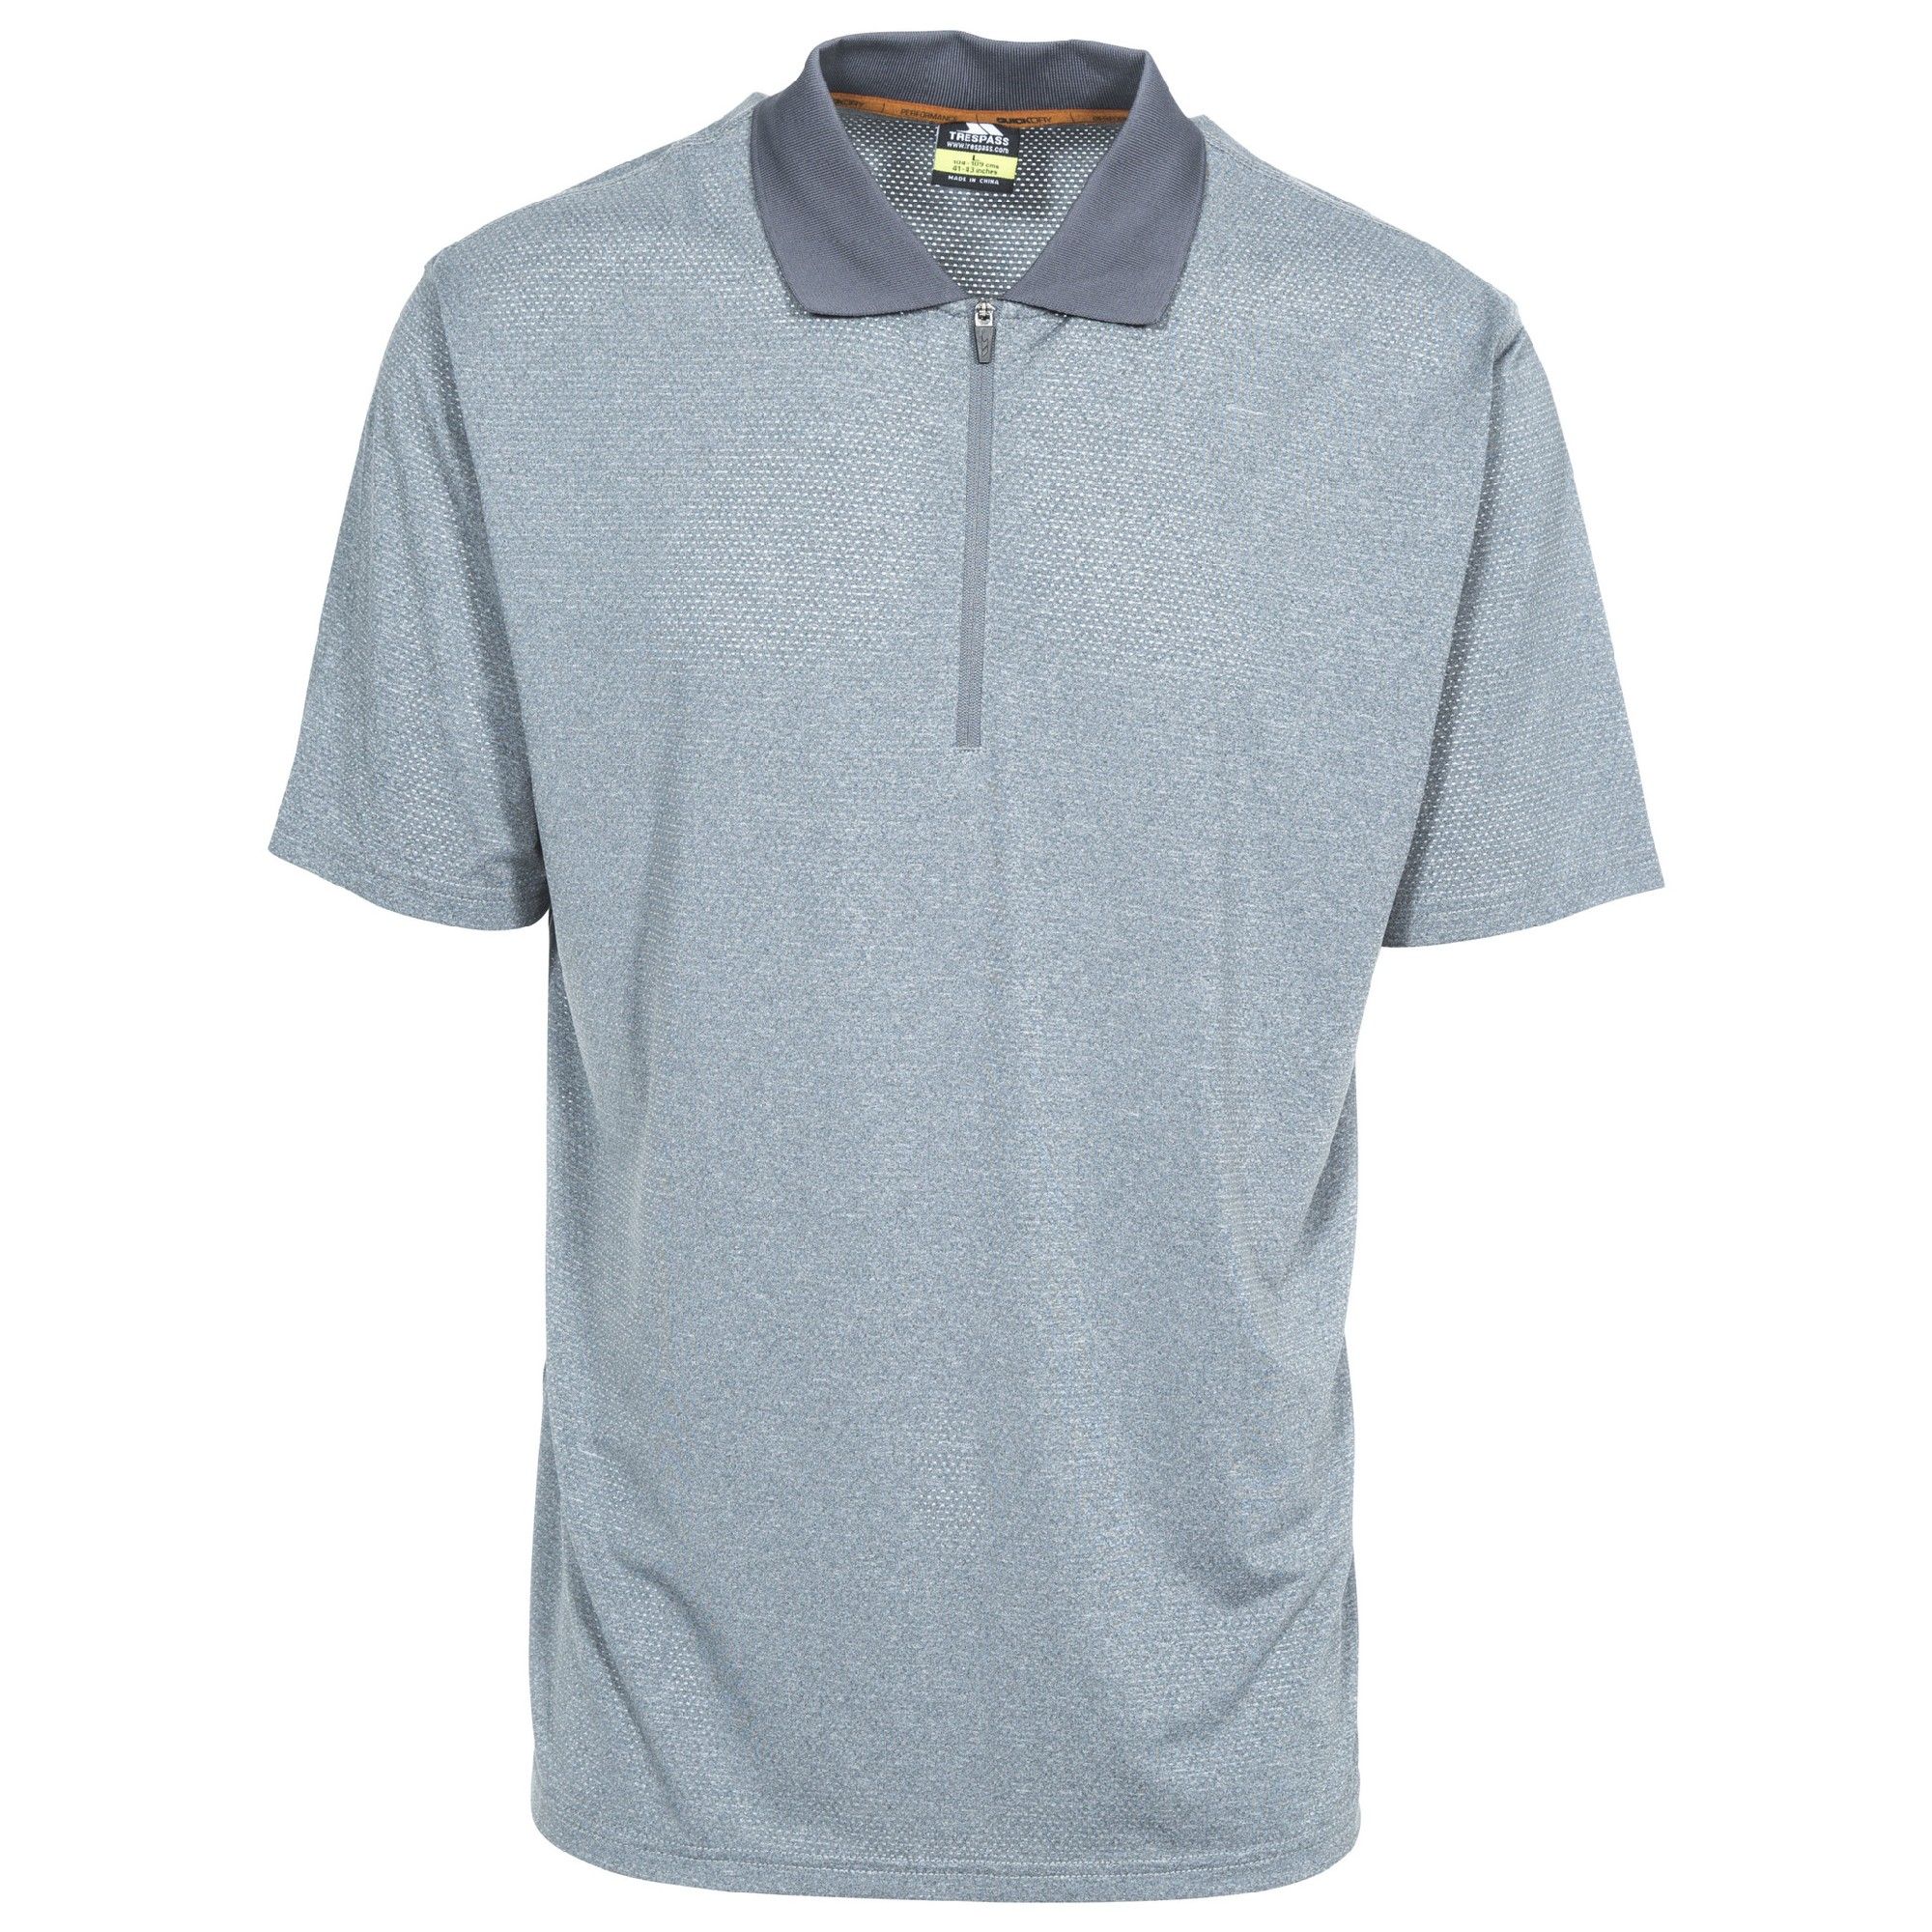 Short sleeves. 1/2 zip neck. Knitted rib collar. Contrast inner neck binding. Quick dry. UV40+. 92% Polyester, 8% Elastane. Trespass Mens Chest Sizing (approx): S - 35-37in/89-94cm, M - 38-40in/96.5-101.5cm, L - 41-43in/104-109cm, XL - 44-46in/111.5-117cm, XXL - 46-48in/117-122cm, 3XL - 48-50in/122-127cm.